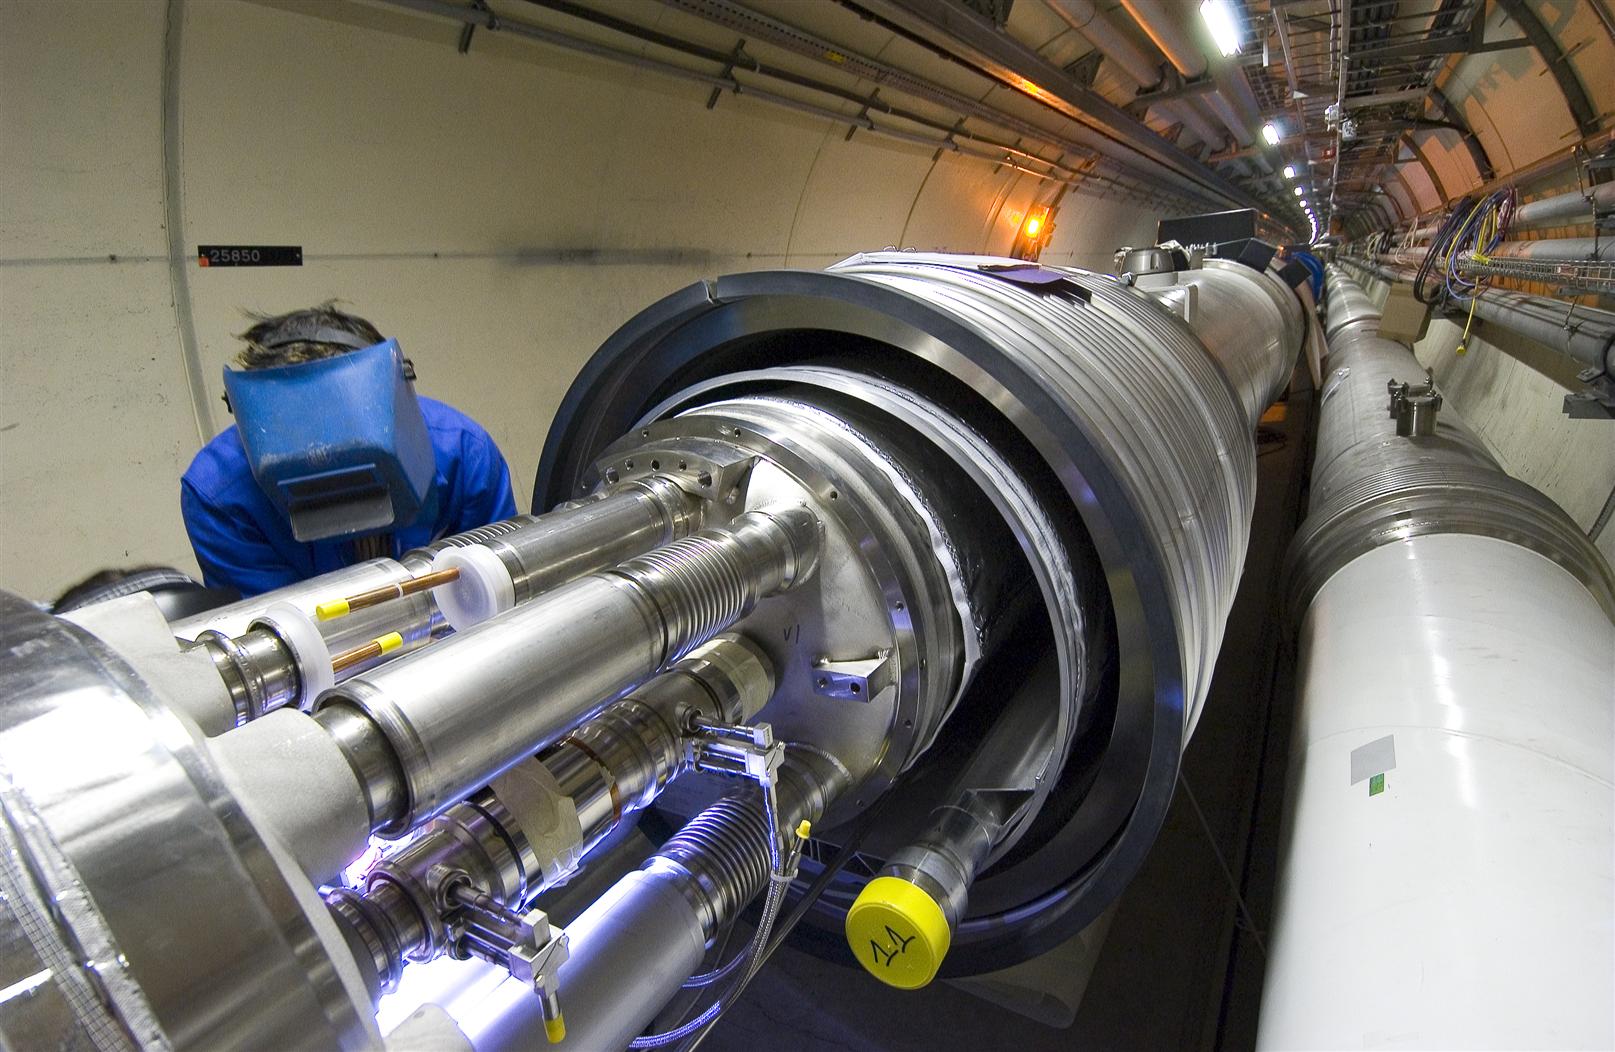 The very first interconnection has now been made between two cryomagnets for the LHC. The 1,700 interconnections for the whole collider will require 123,000 separate welding and assembly operations.